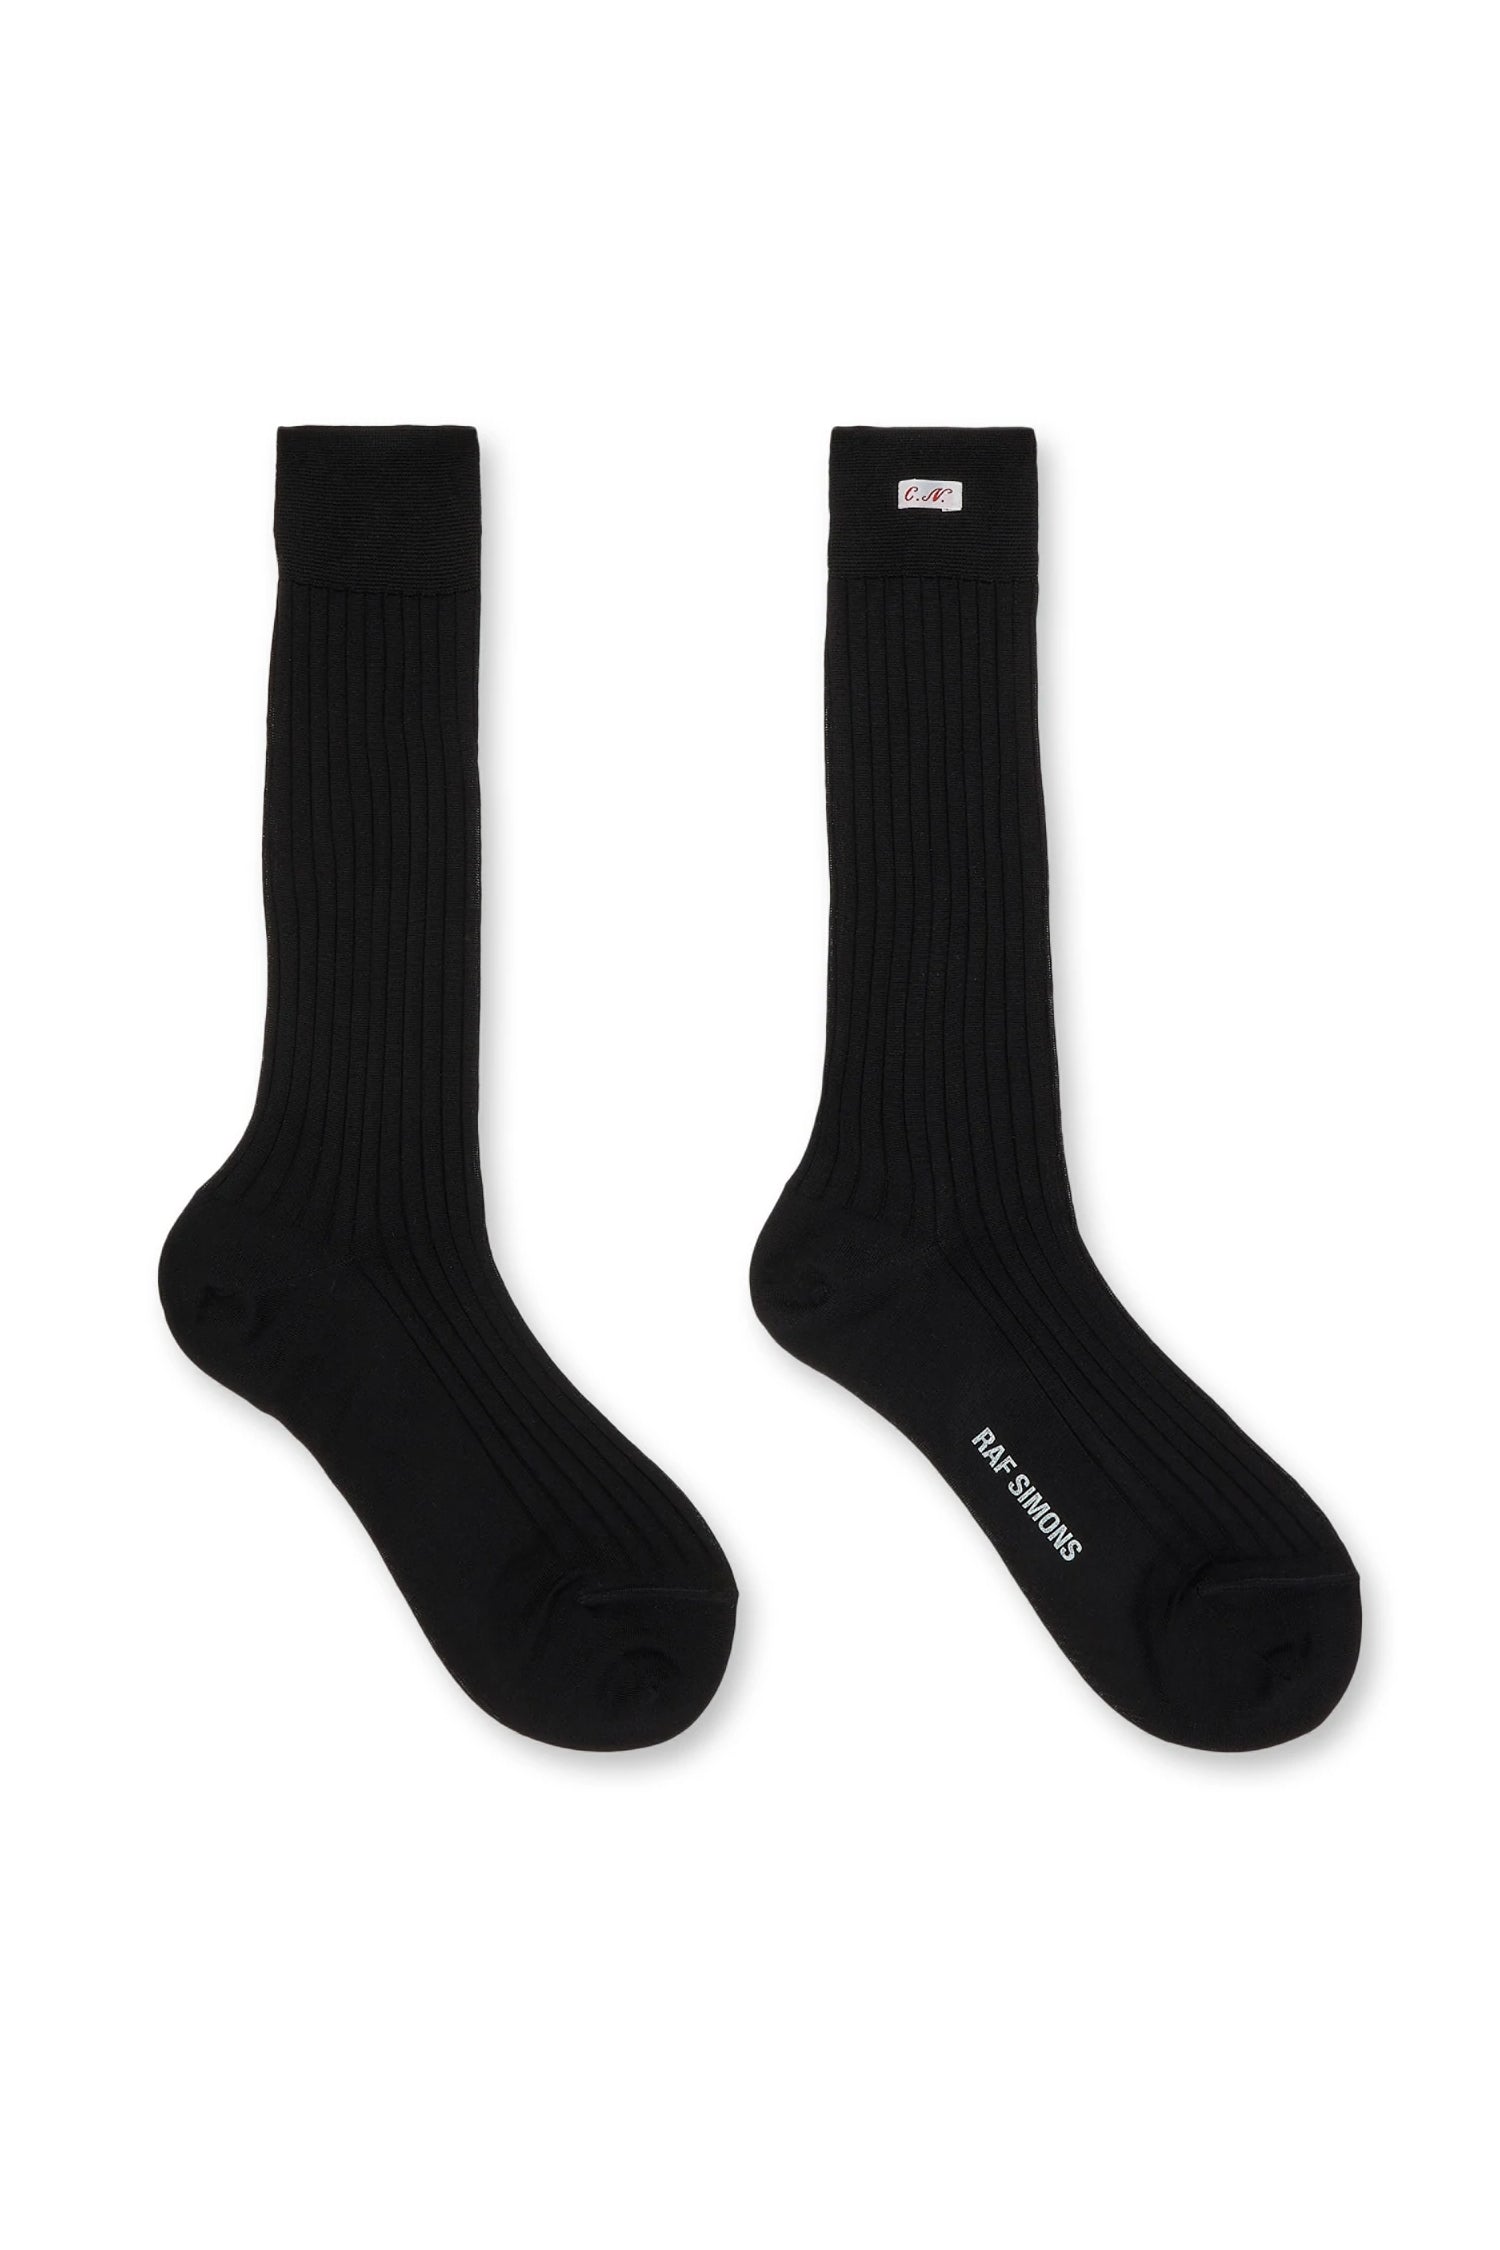 SOCKS WITH ARTISTS INITIALS LABEL,S22